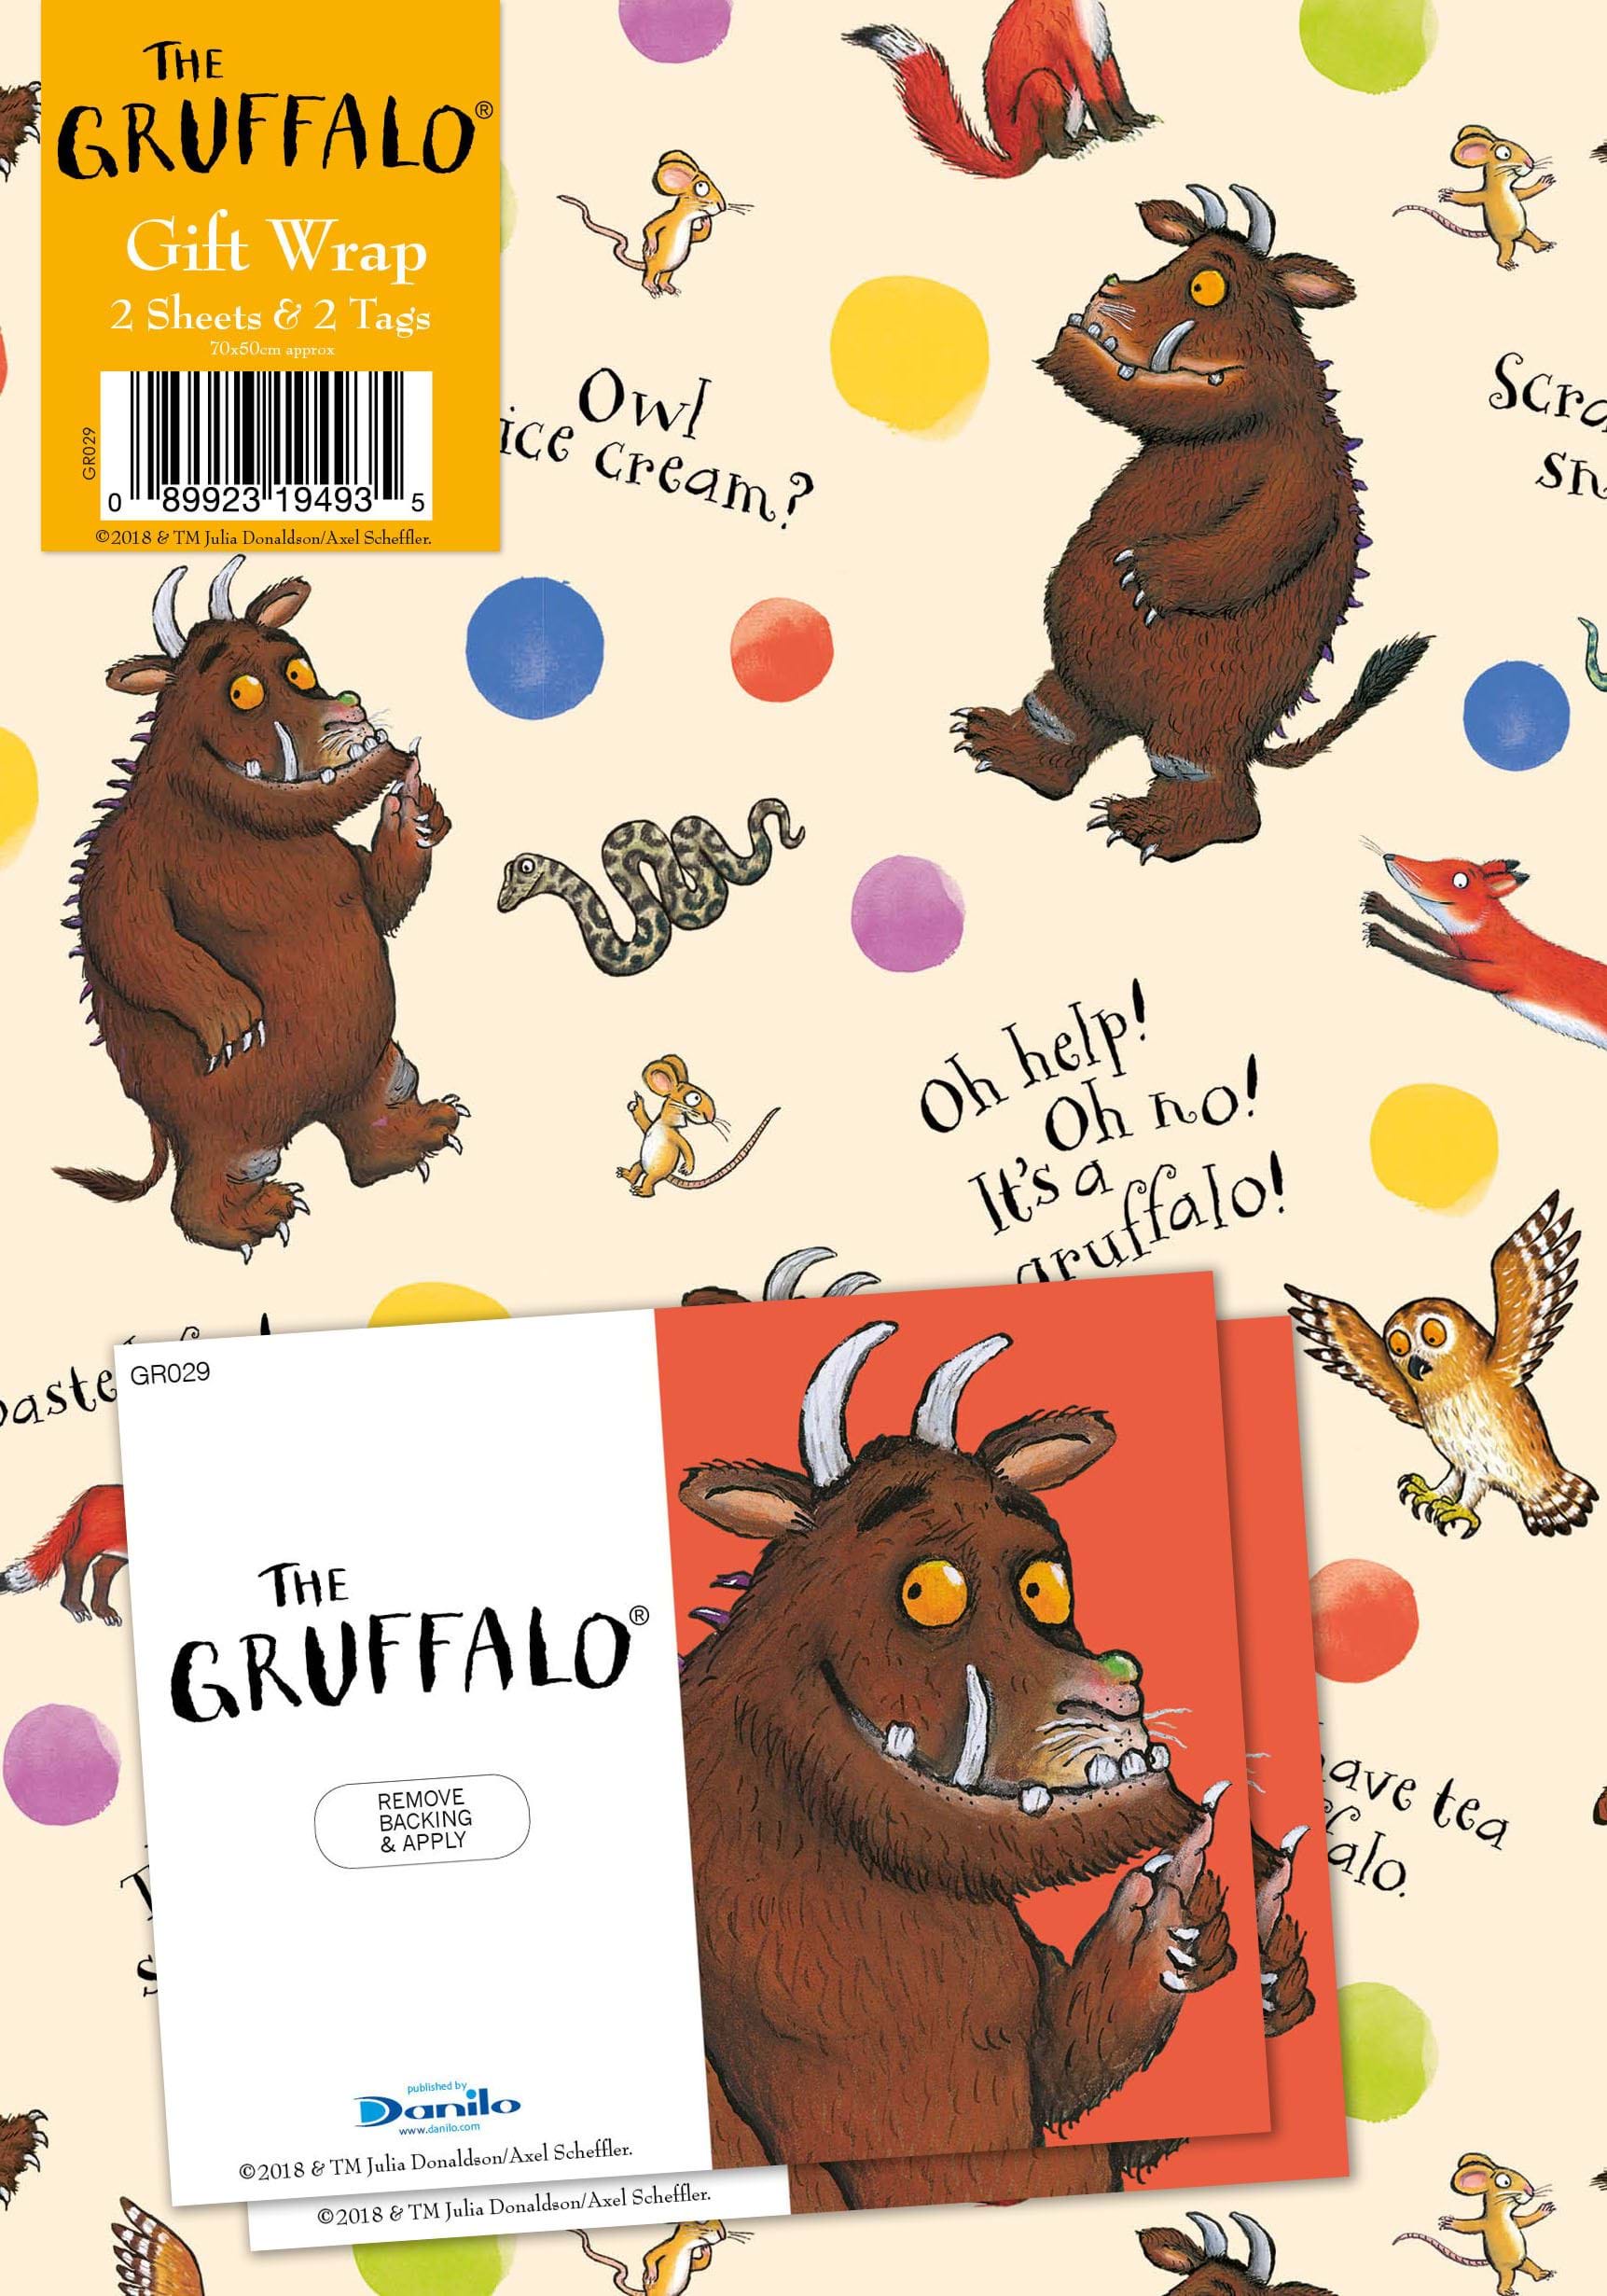 The Gruffalo Wrapping Paper 2 Sheets and 2 Tags